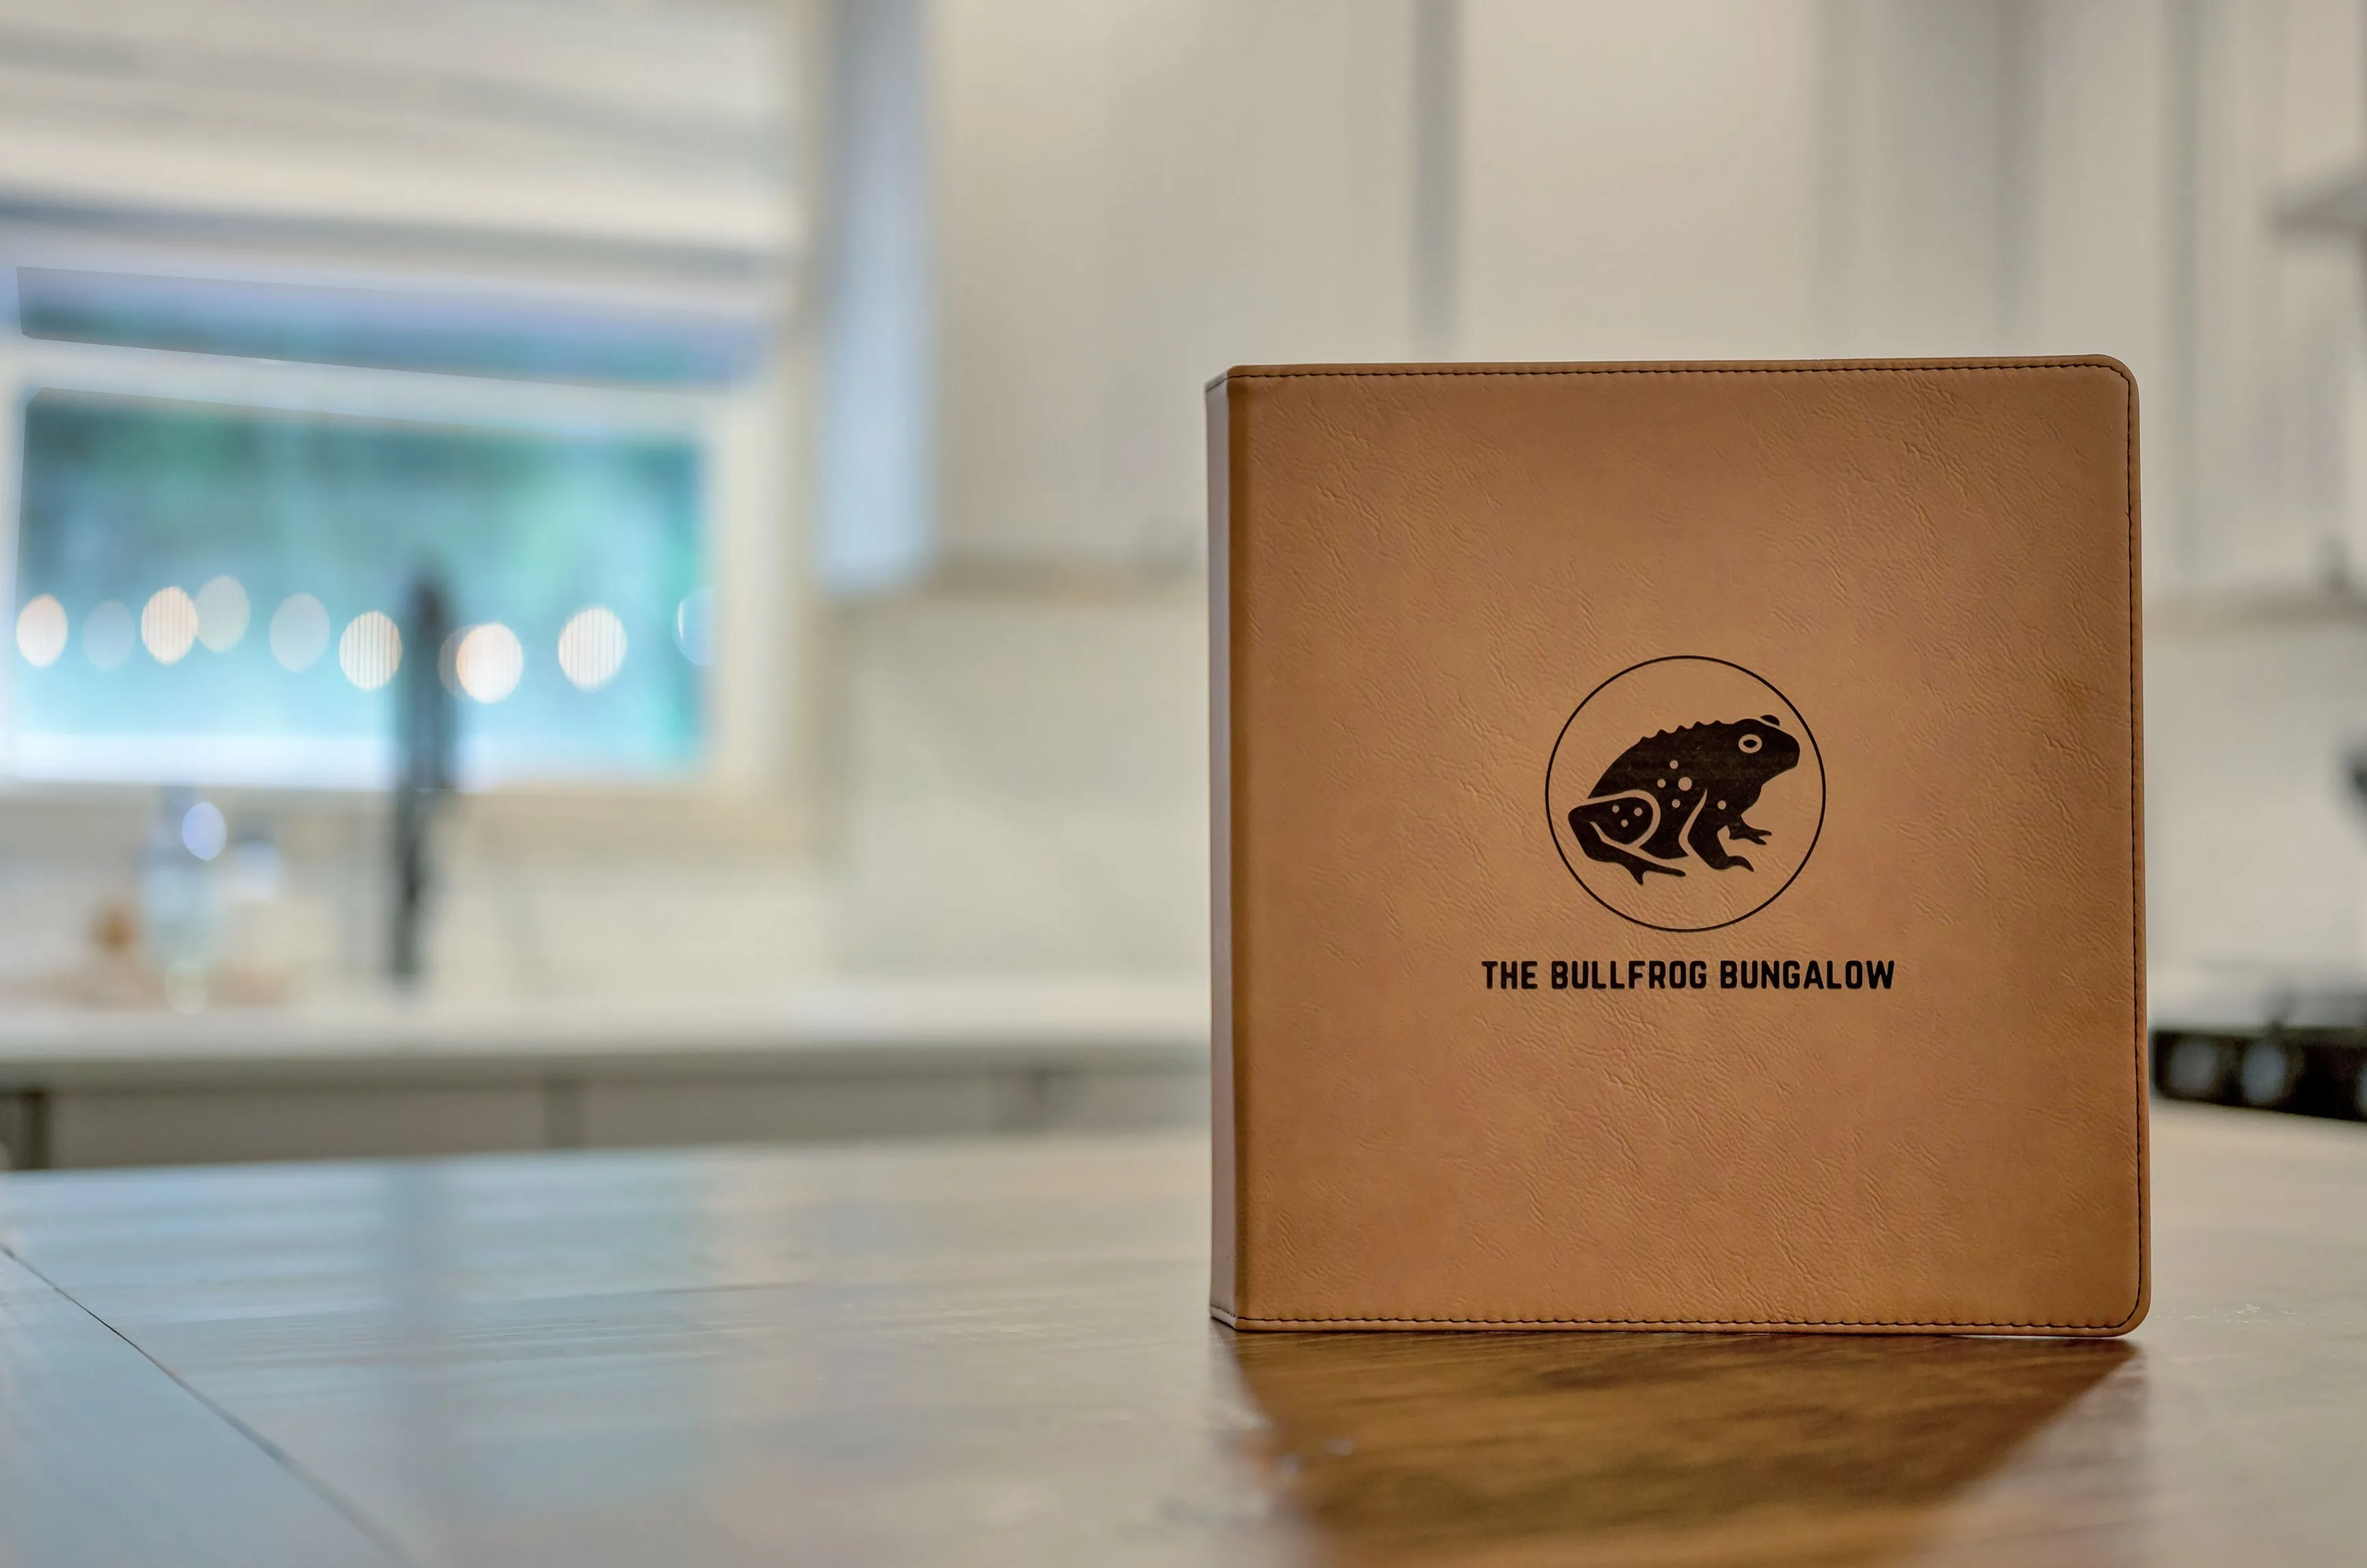 Leather-bound menu cover with a bullfrog logo for 'The Bullfrog Bungalow' on a wooden countertop in a kitchen setting.